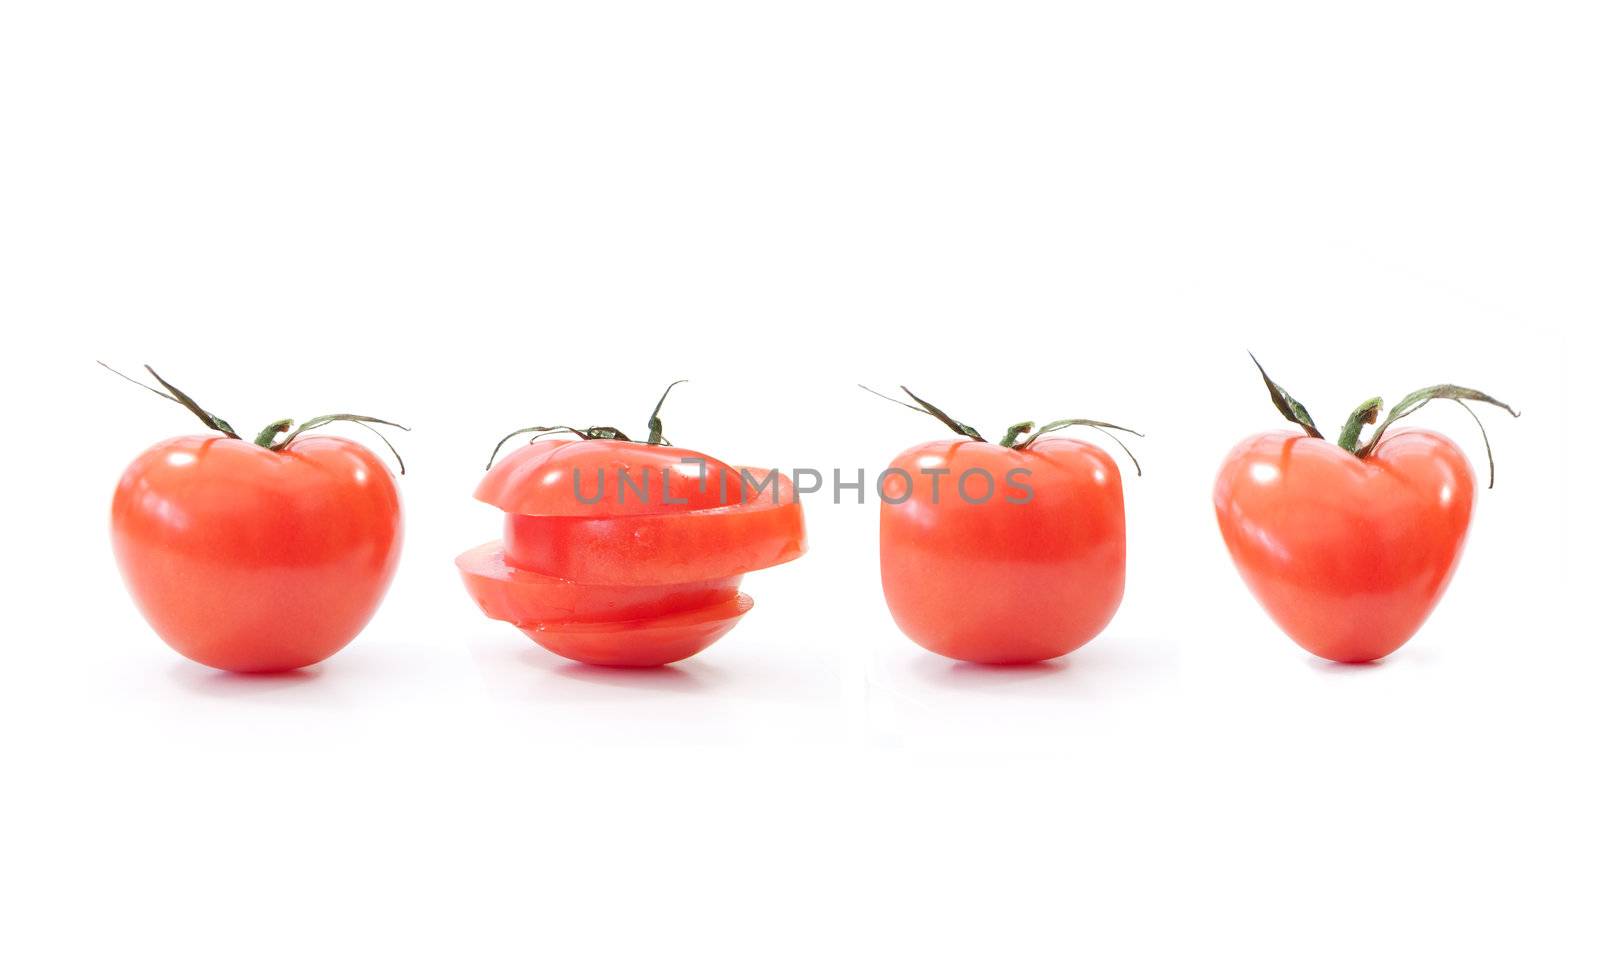 Different types of tomato including square, heart, and slices 